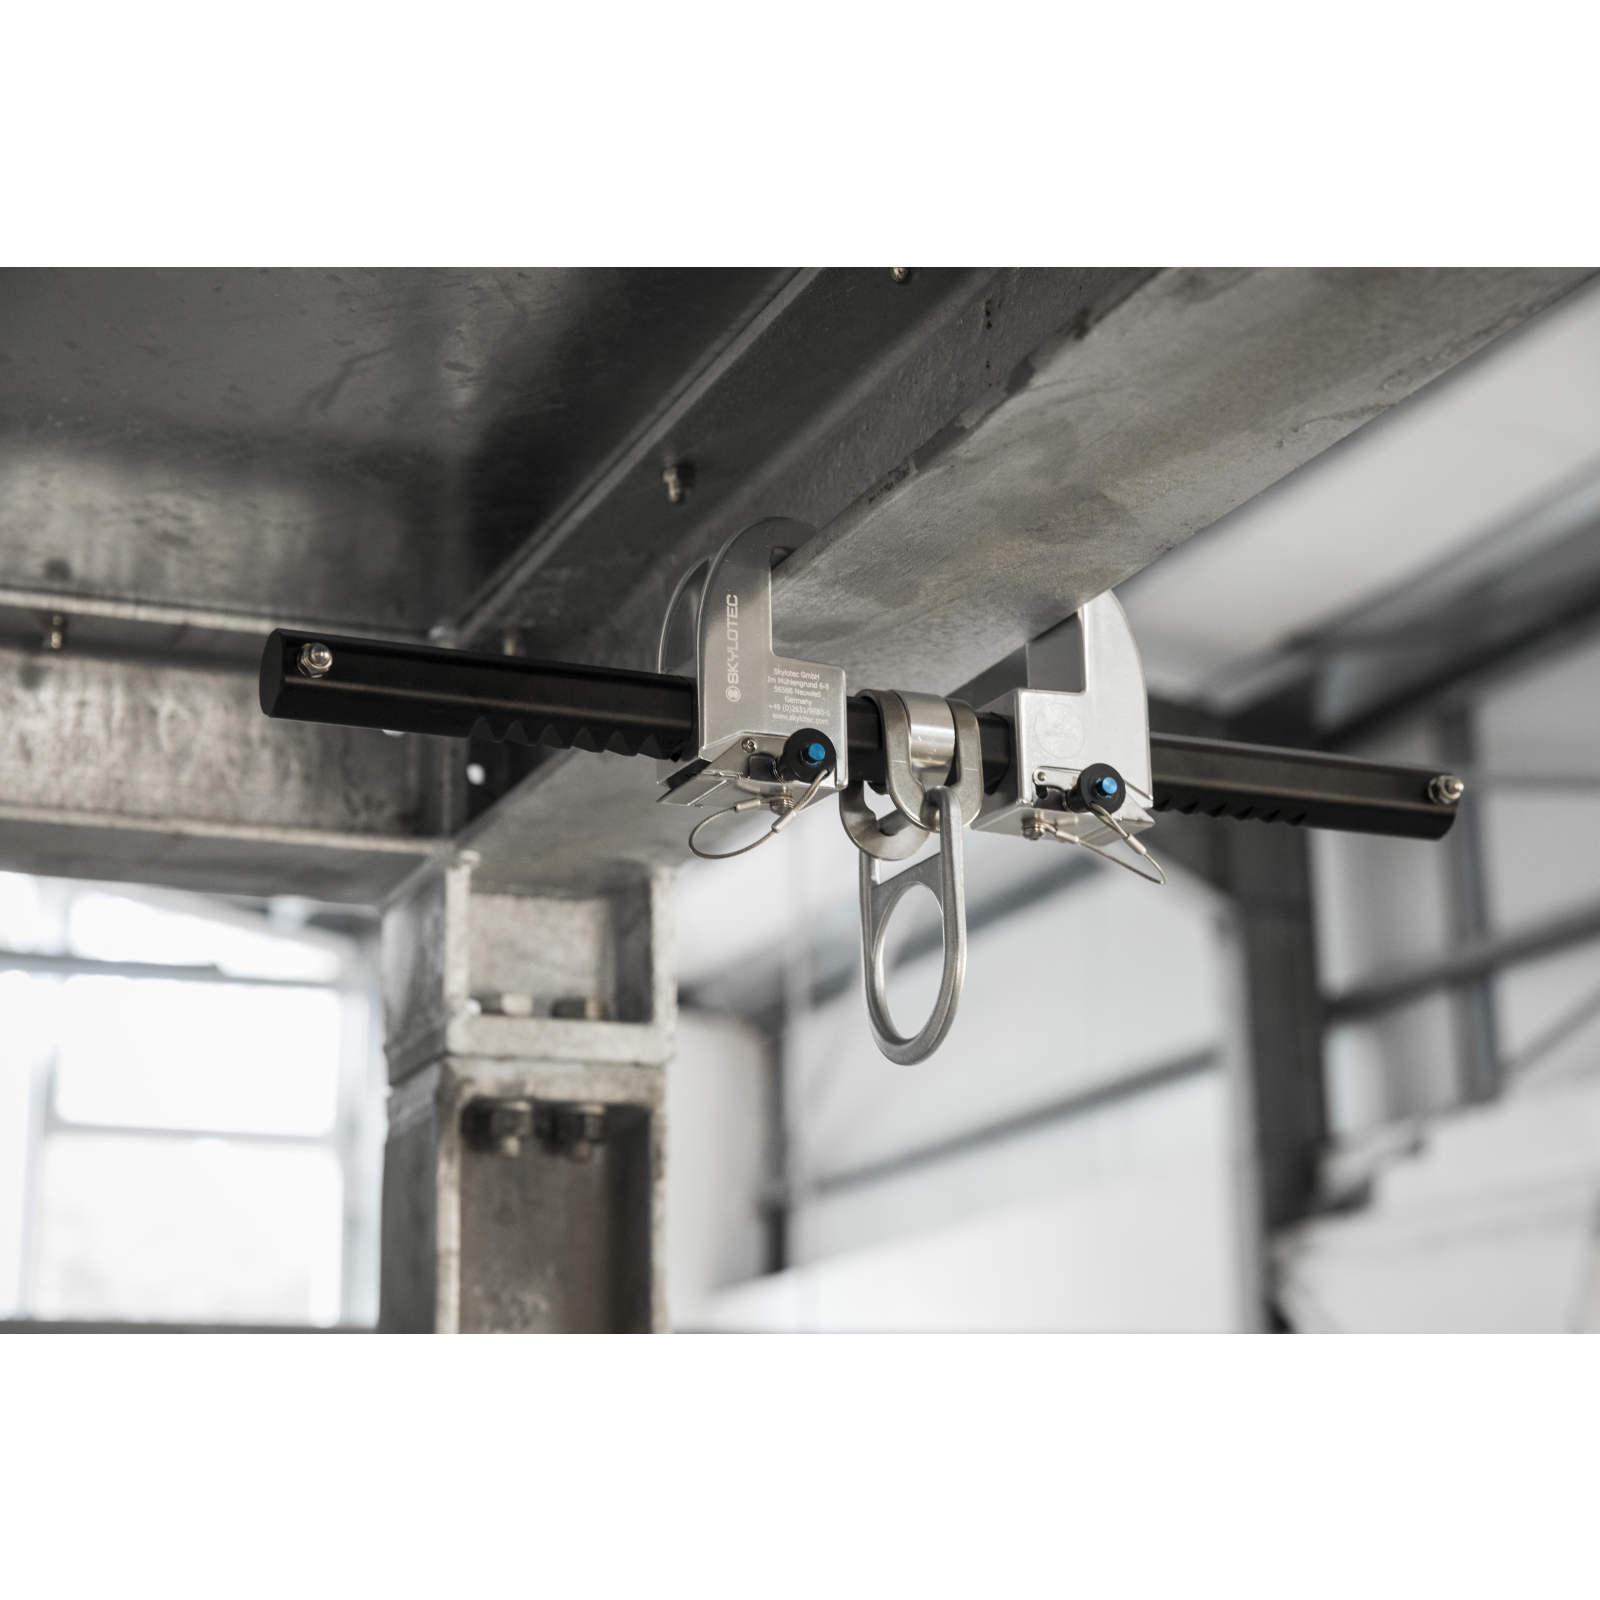 The adjustable clamping jaws ensure rapid and simple attachment to steel beams, whilst the multi-level safety system reliably prevents any unwanted movement or slipping during use.